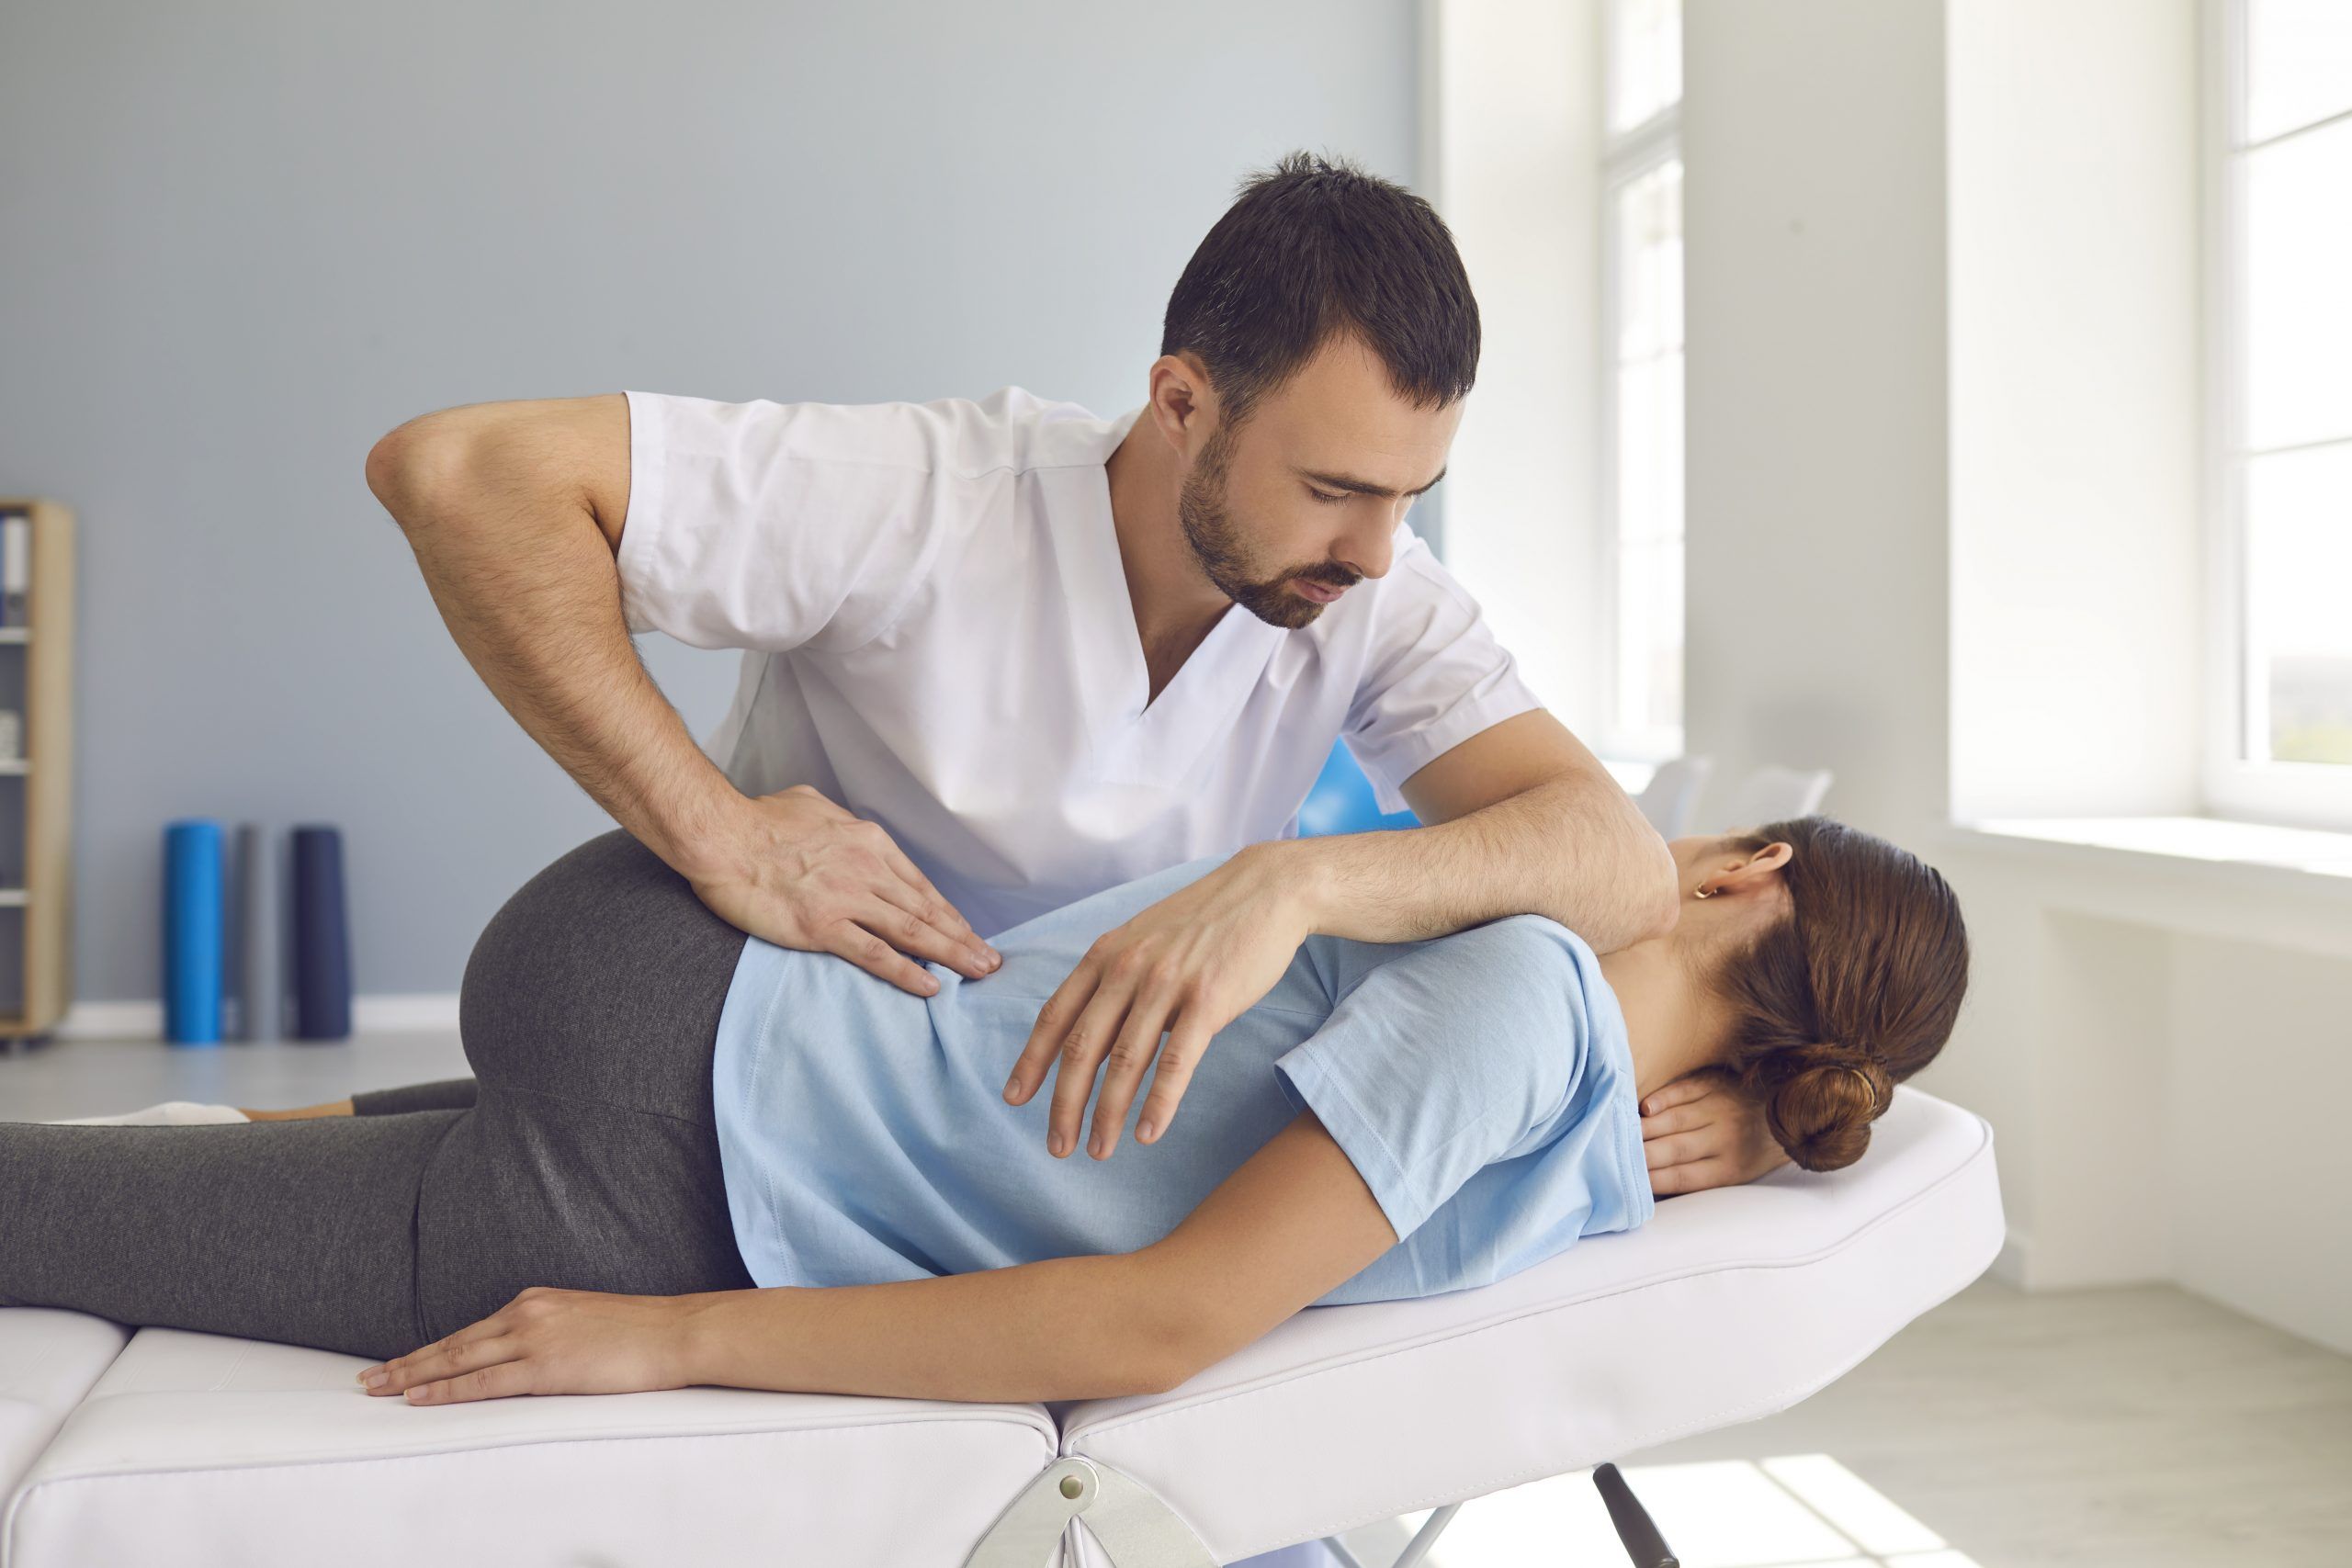 Chiropractic care has many benefits, but there are risks to be aware of. GETTY